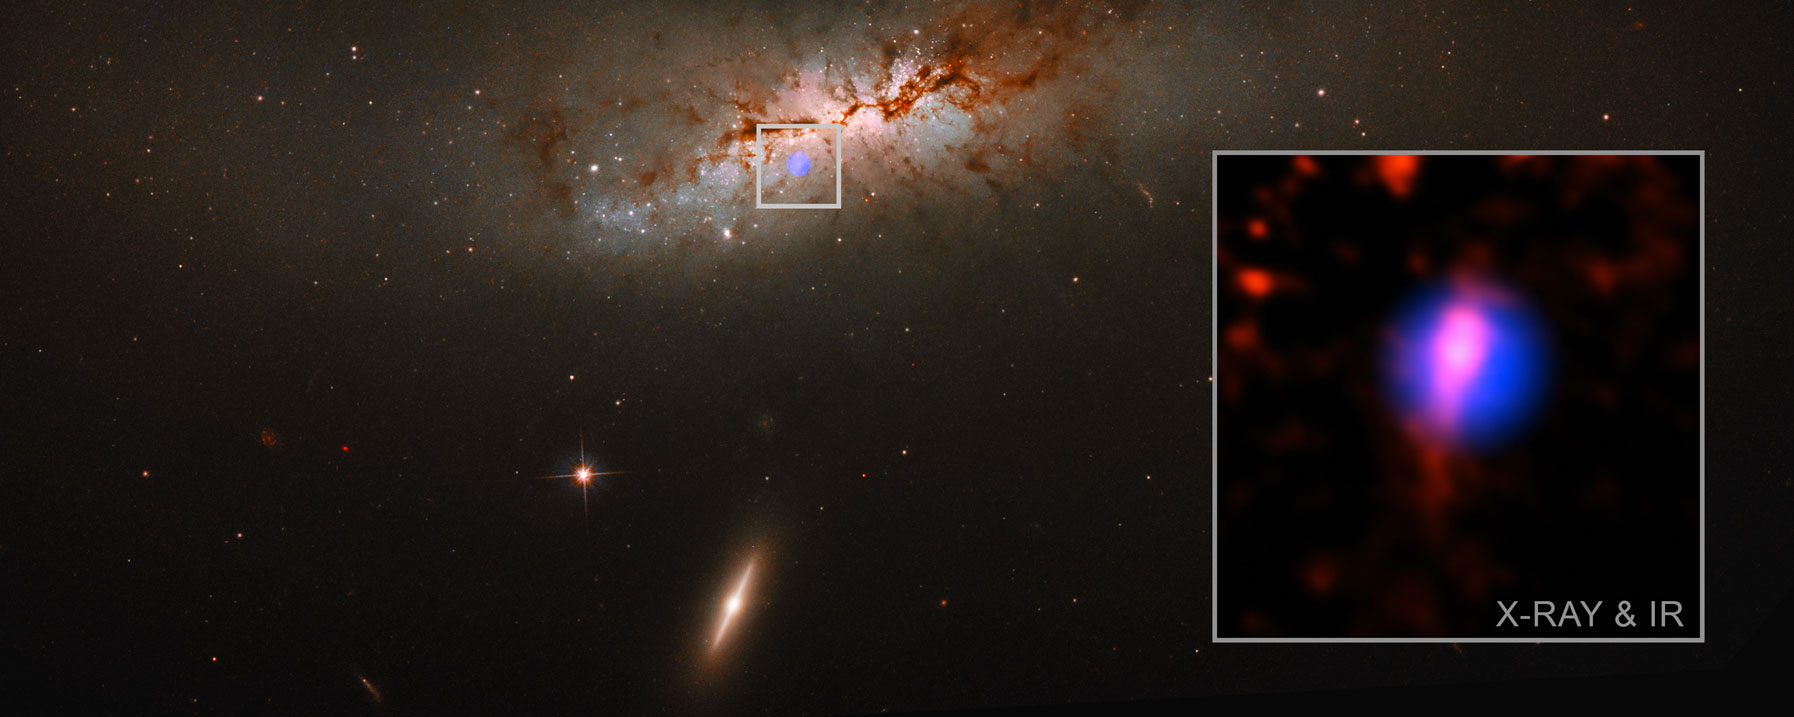 The inset features a close-up view of NGC 4424 that shows Chandra X-ray data (blue) plus a version of the optical data (red) that has had light from a model of NGC 4424 subtracted from the image to show other faint features.